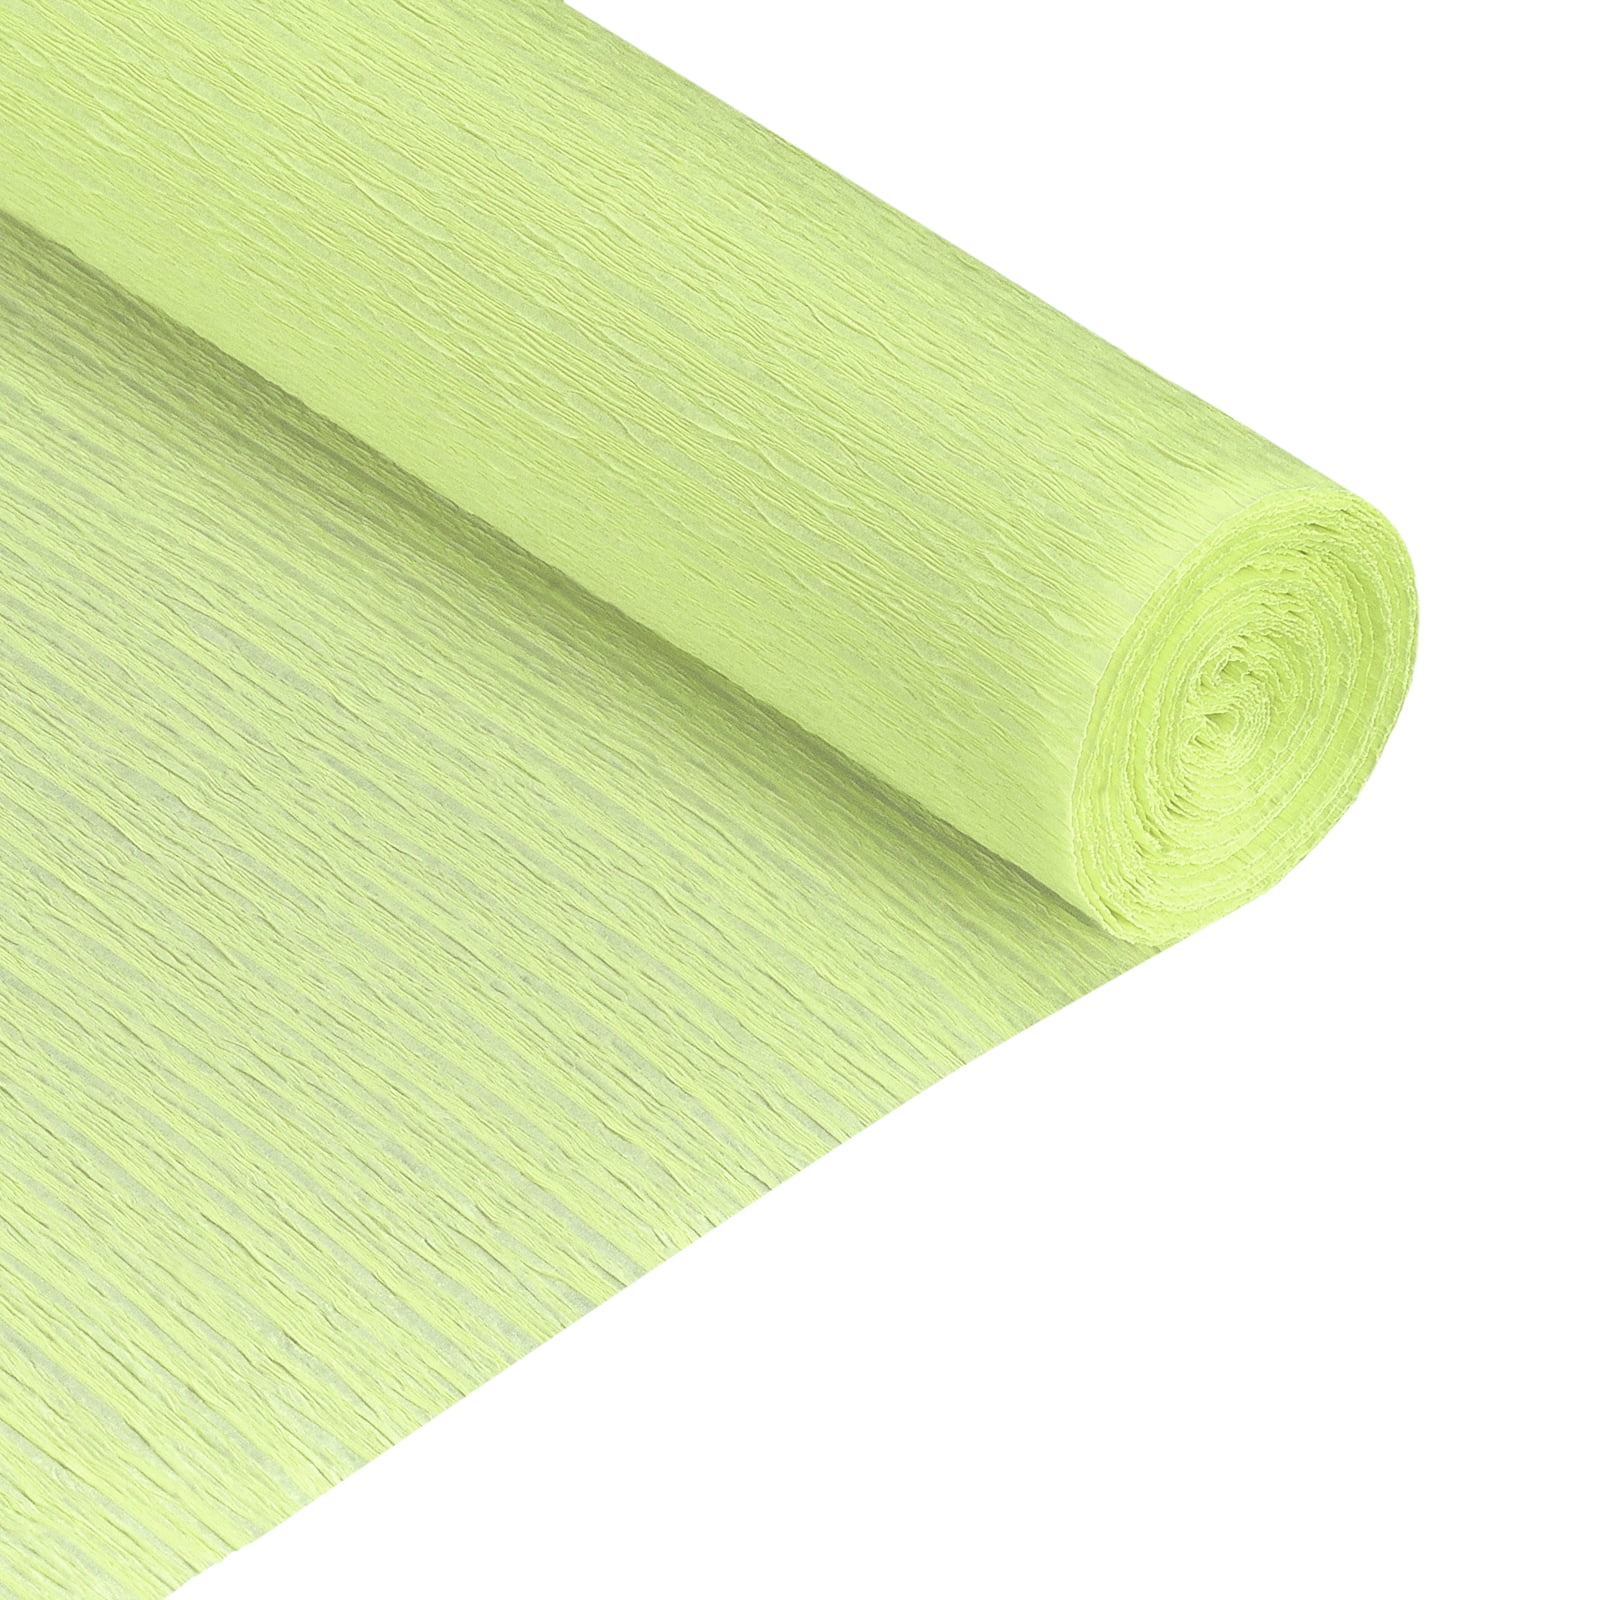 Creativity Street Crepe Paper, Green, 20 In. x 7.5 Ft., 12 Sheets at